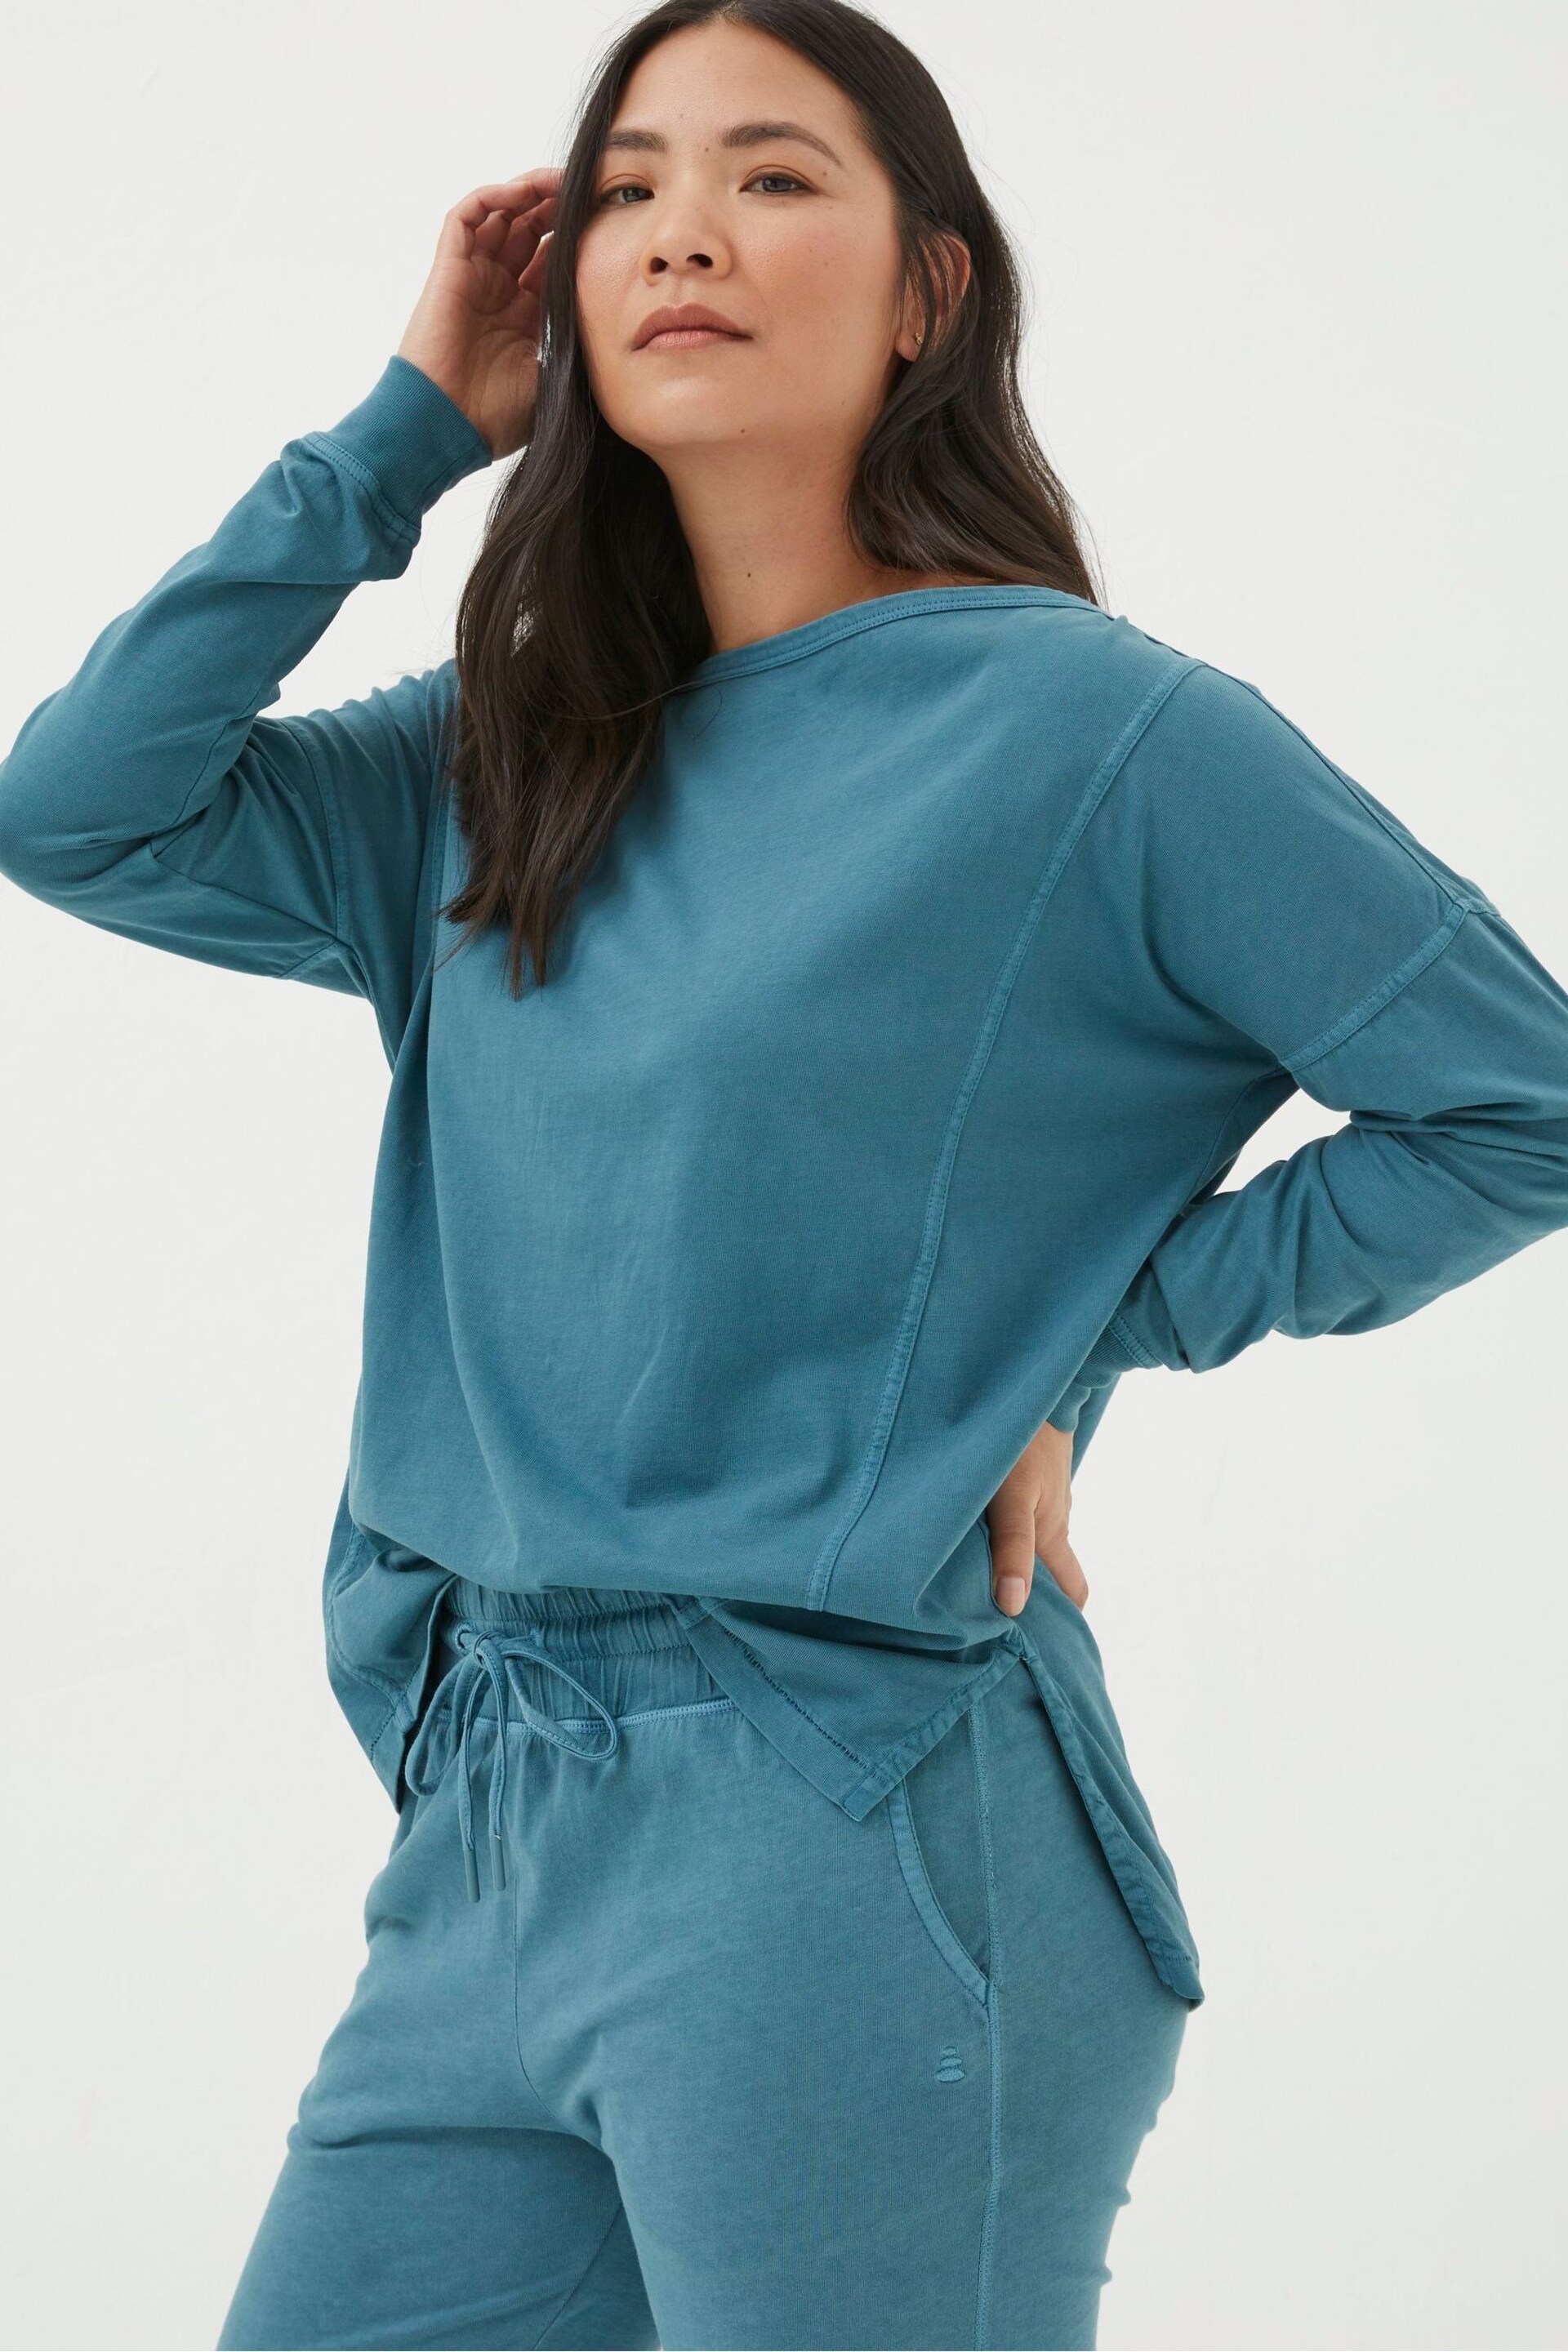 FatFace Blue Valo Tunic Top - Image 2 of 5